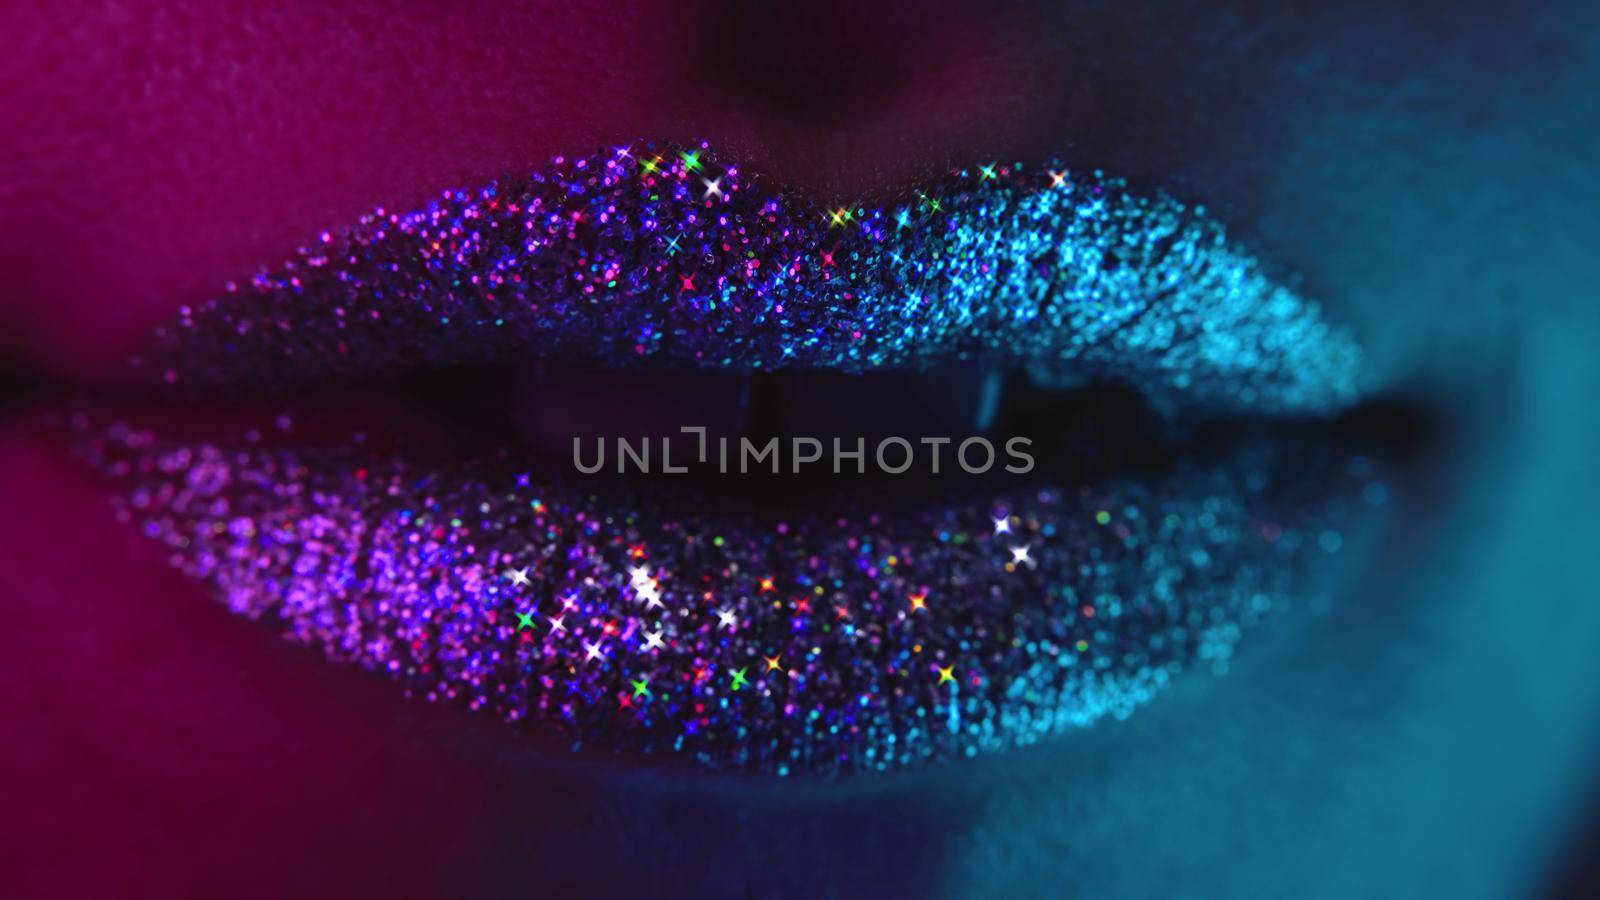 Fashion model with bright shiny sparkles on plump lips. Macro view of woman with glamorous make-up. Nightlife, night club concept. High quality photo